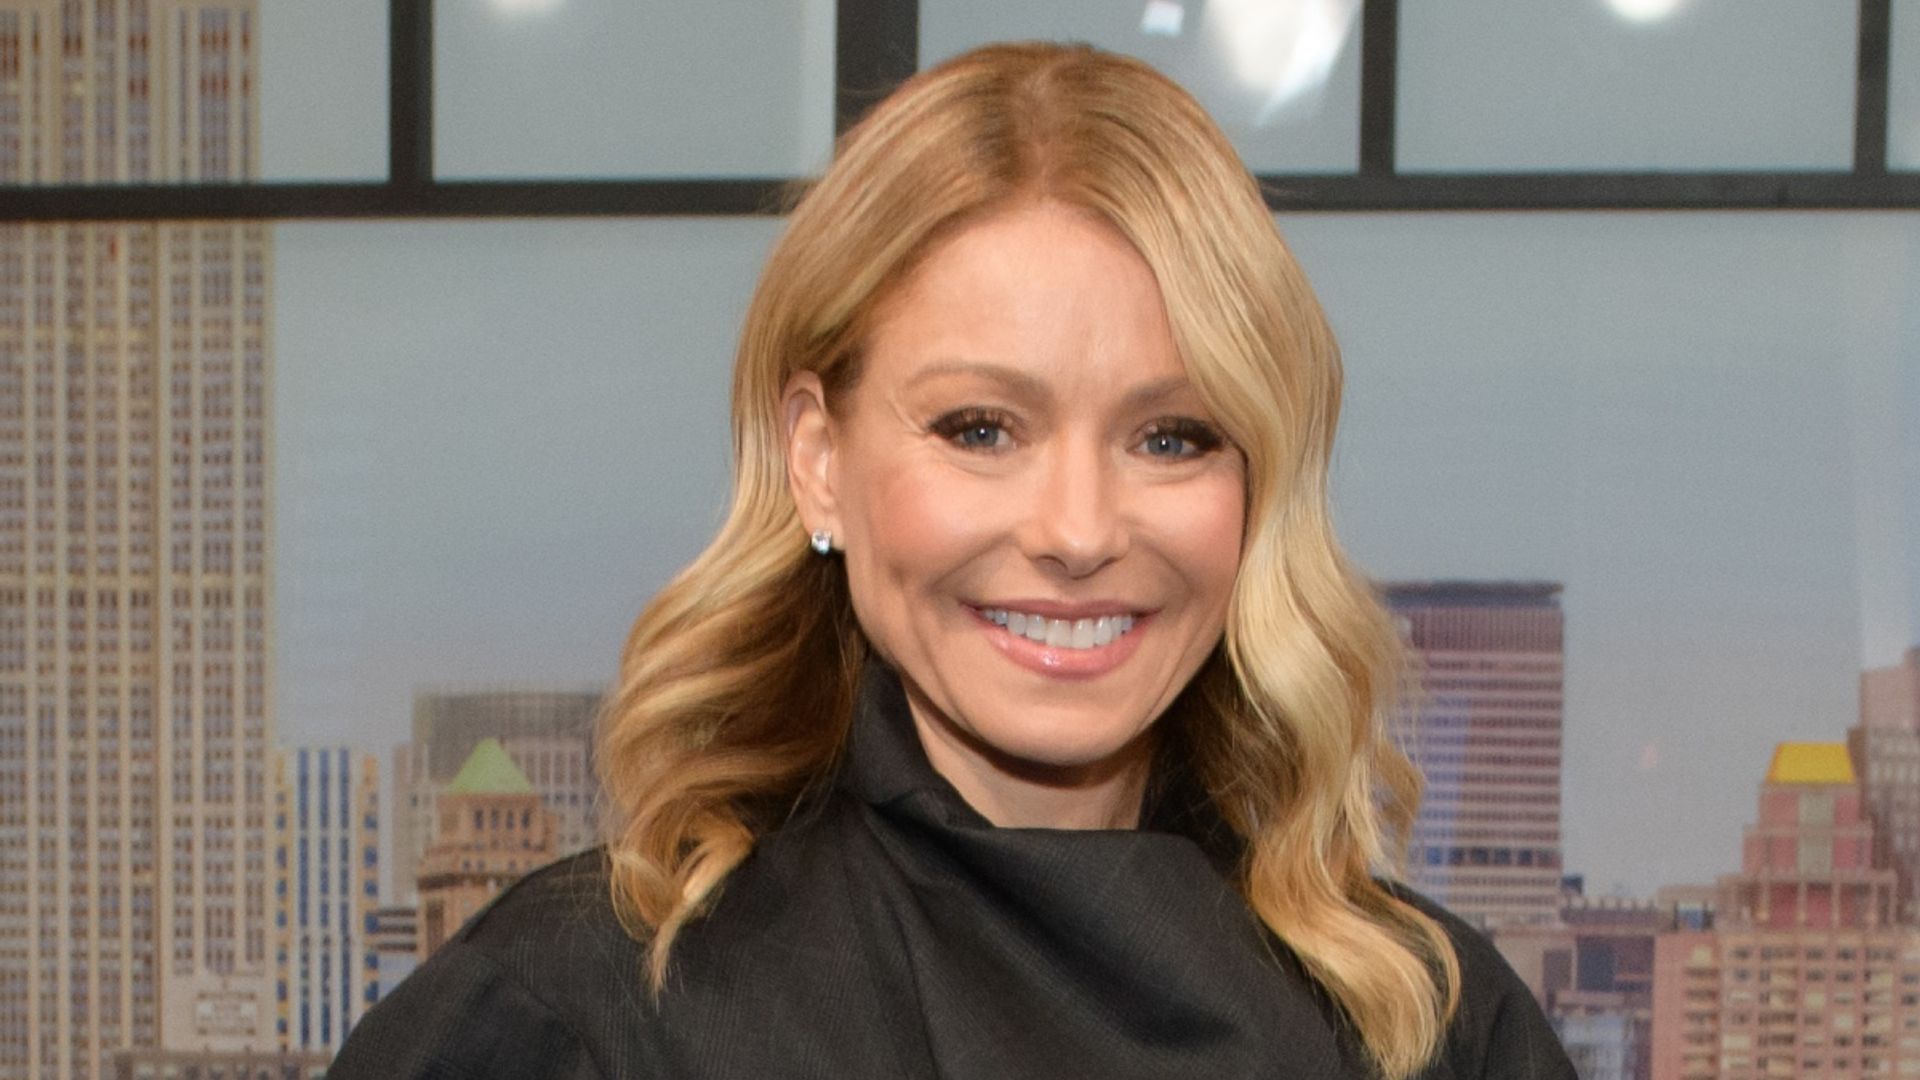 Kelly Ripa mulls over guest's unexplained appearance change on the air